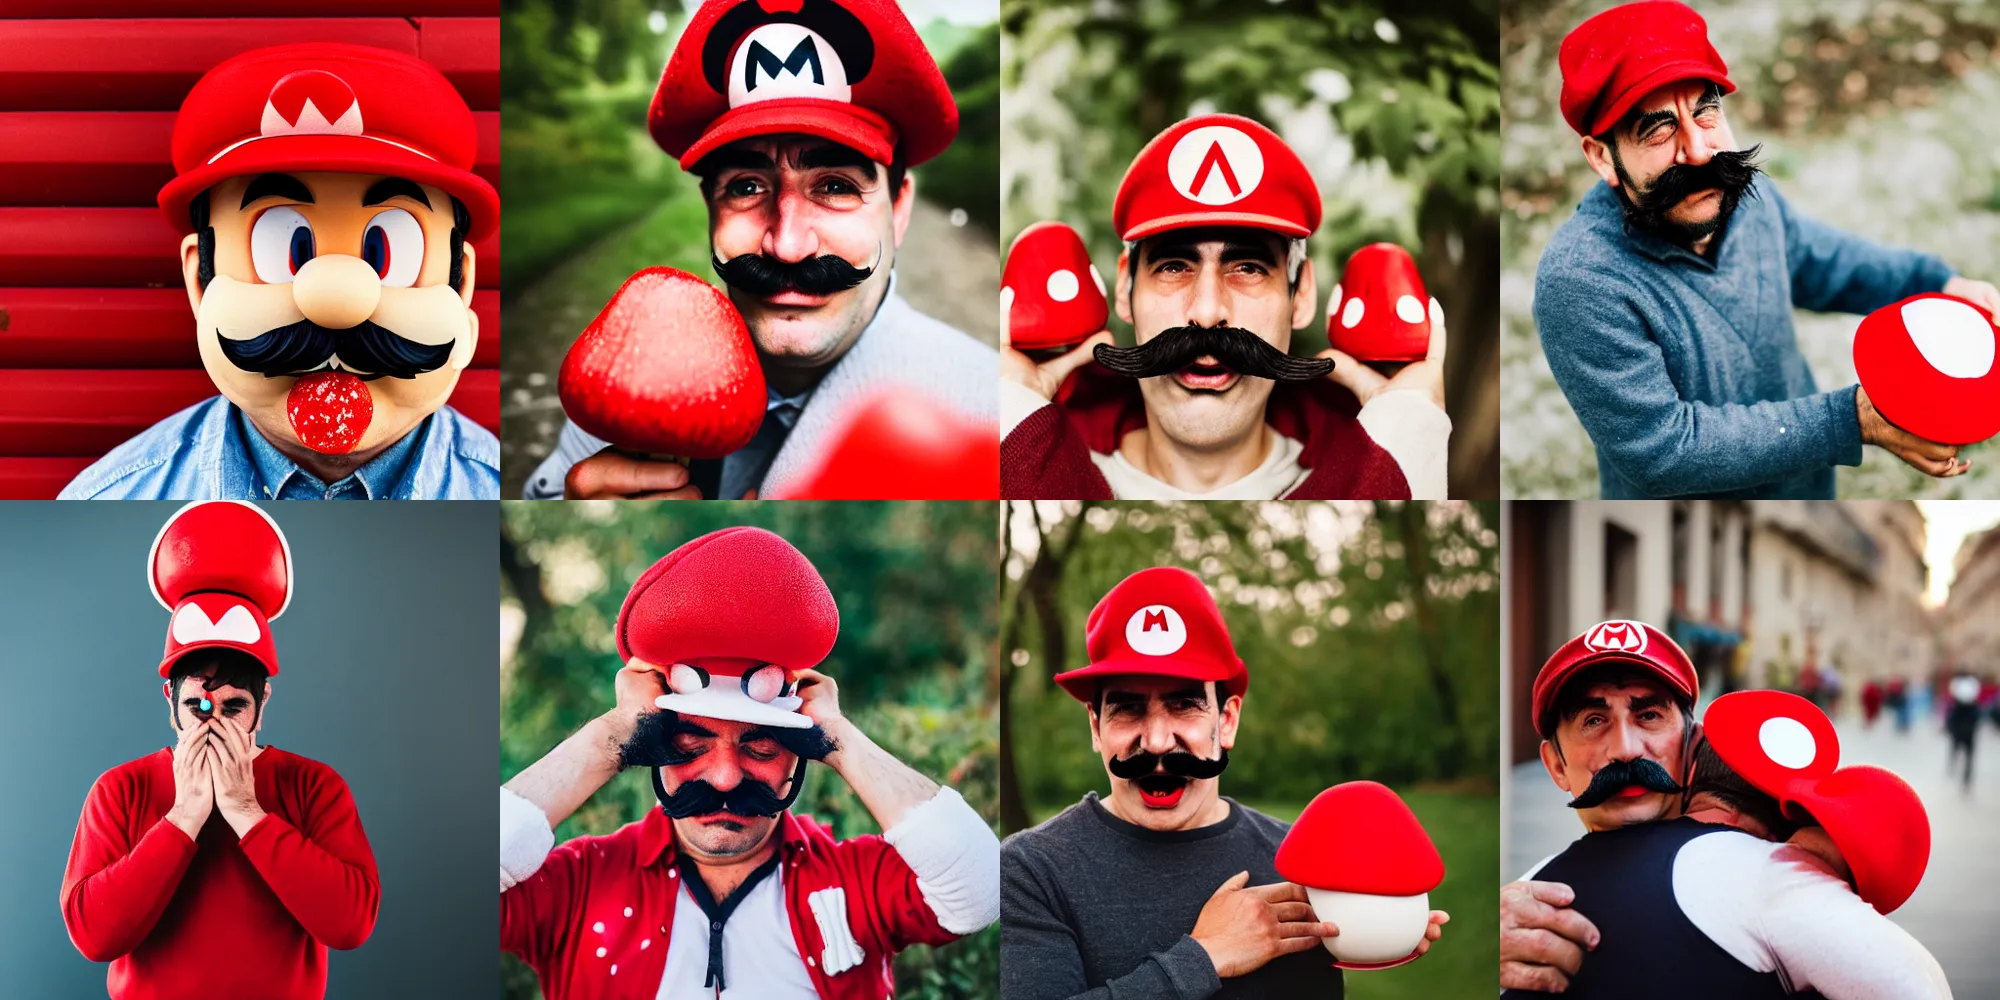 Prompt: italian man with a mustache dressed as mario wearing a solid red mario hat crying tears of joy hugging a red mushroom with white spots, 85mm lens, f1.8